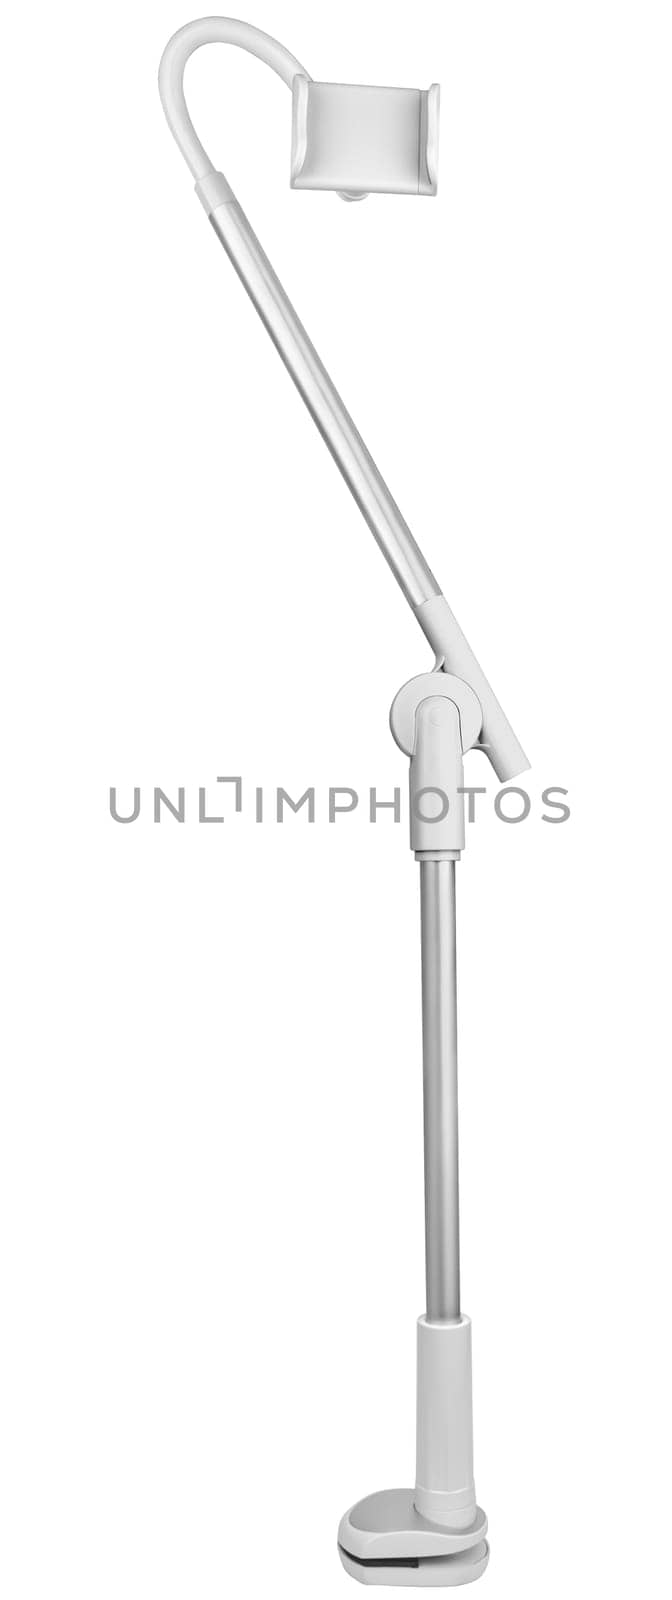 tripod for bloggers phone, on a white background in isolation